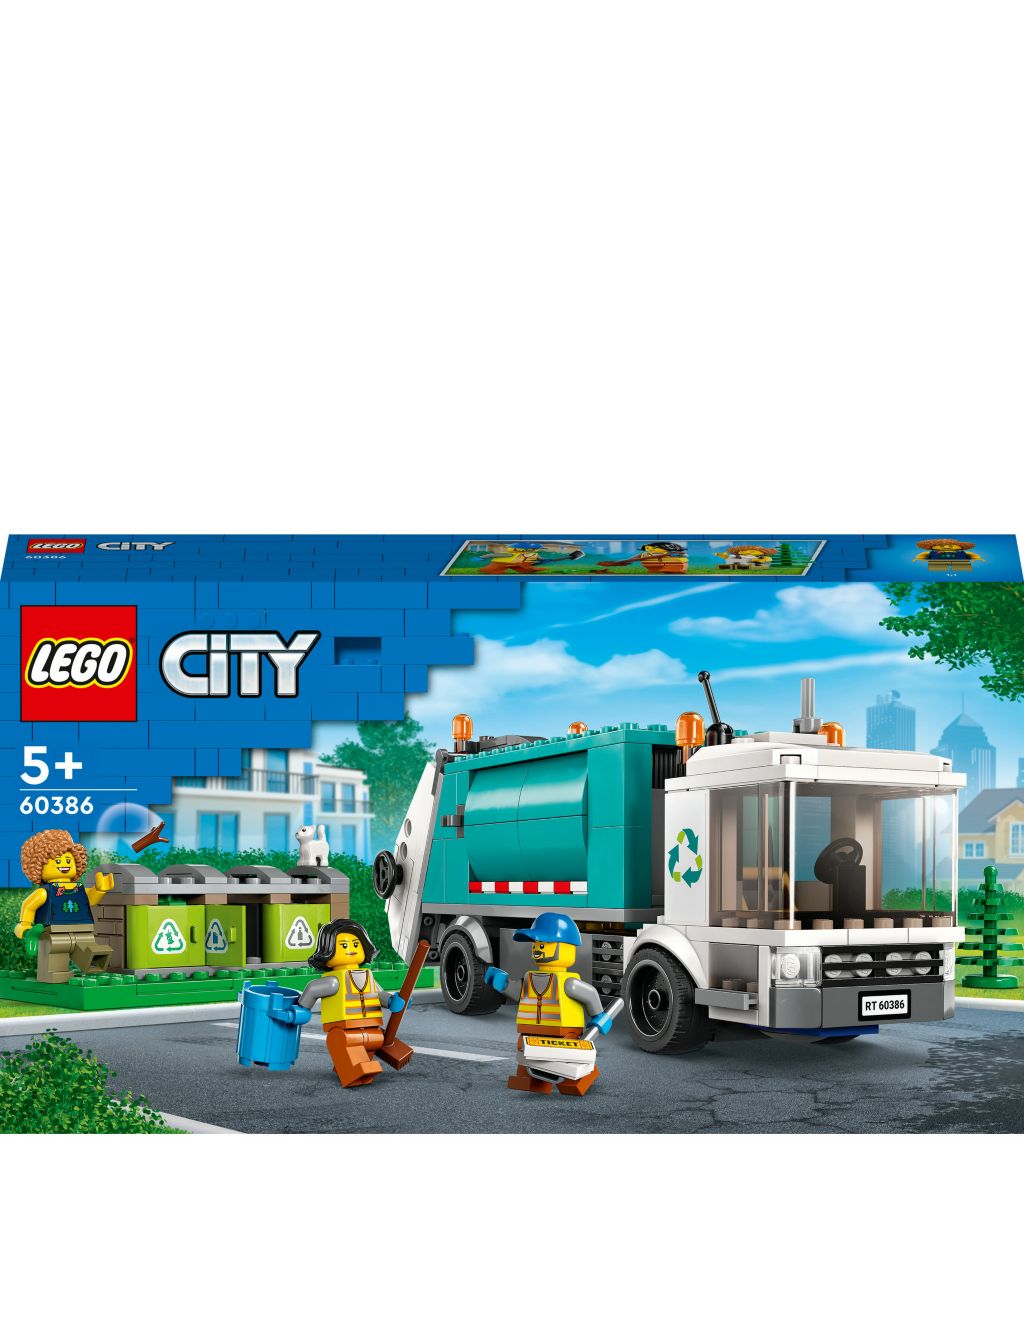 LEGO City Recycling Truck Bin Lorry Toy (5+ Yrs) image 2